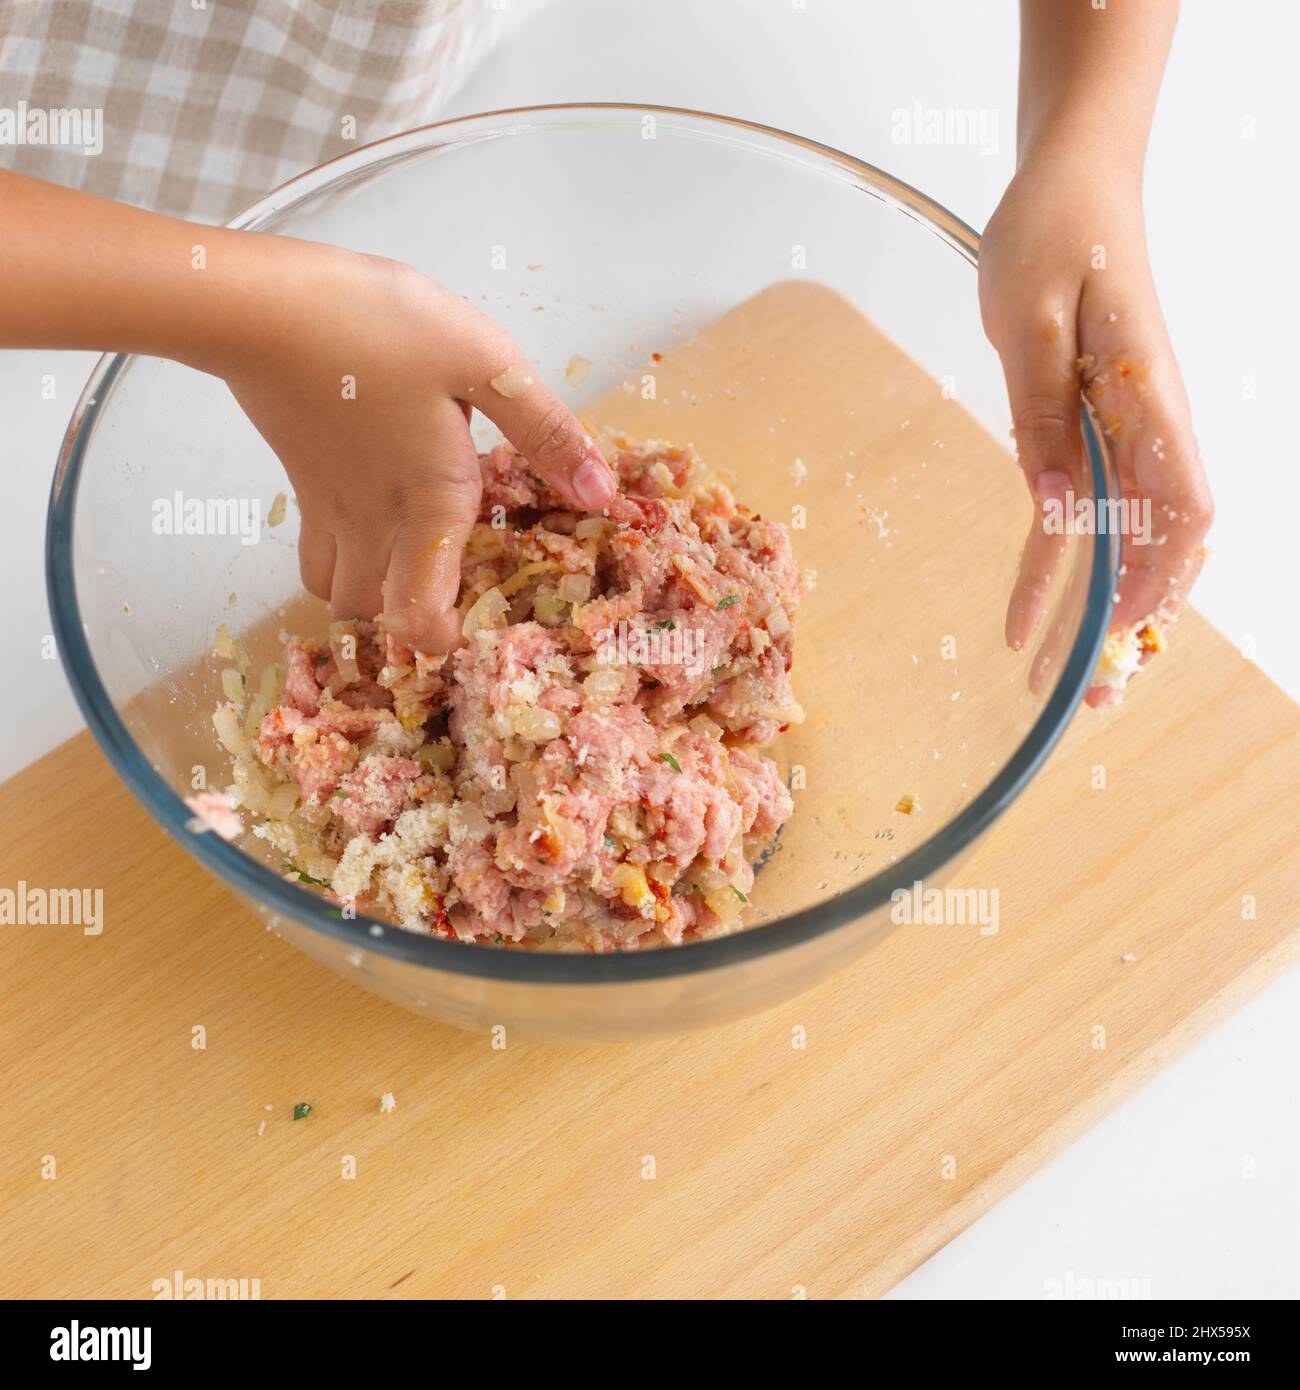 https://c8.alamy.com/comp/2HX595X/girl-mixing-raw-meat-ball-ingredients-in-large-glass-bowl-using-hands-close-up-2HX595X.jpg